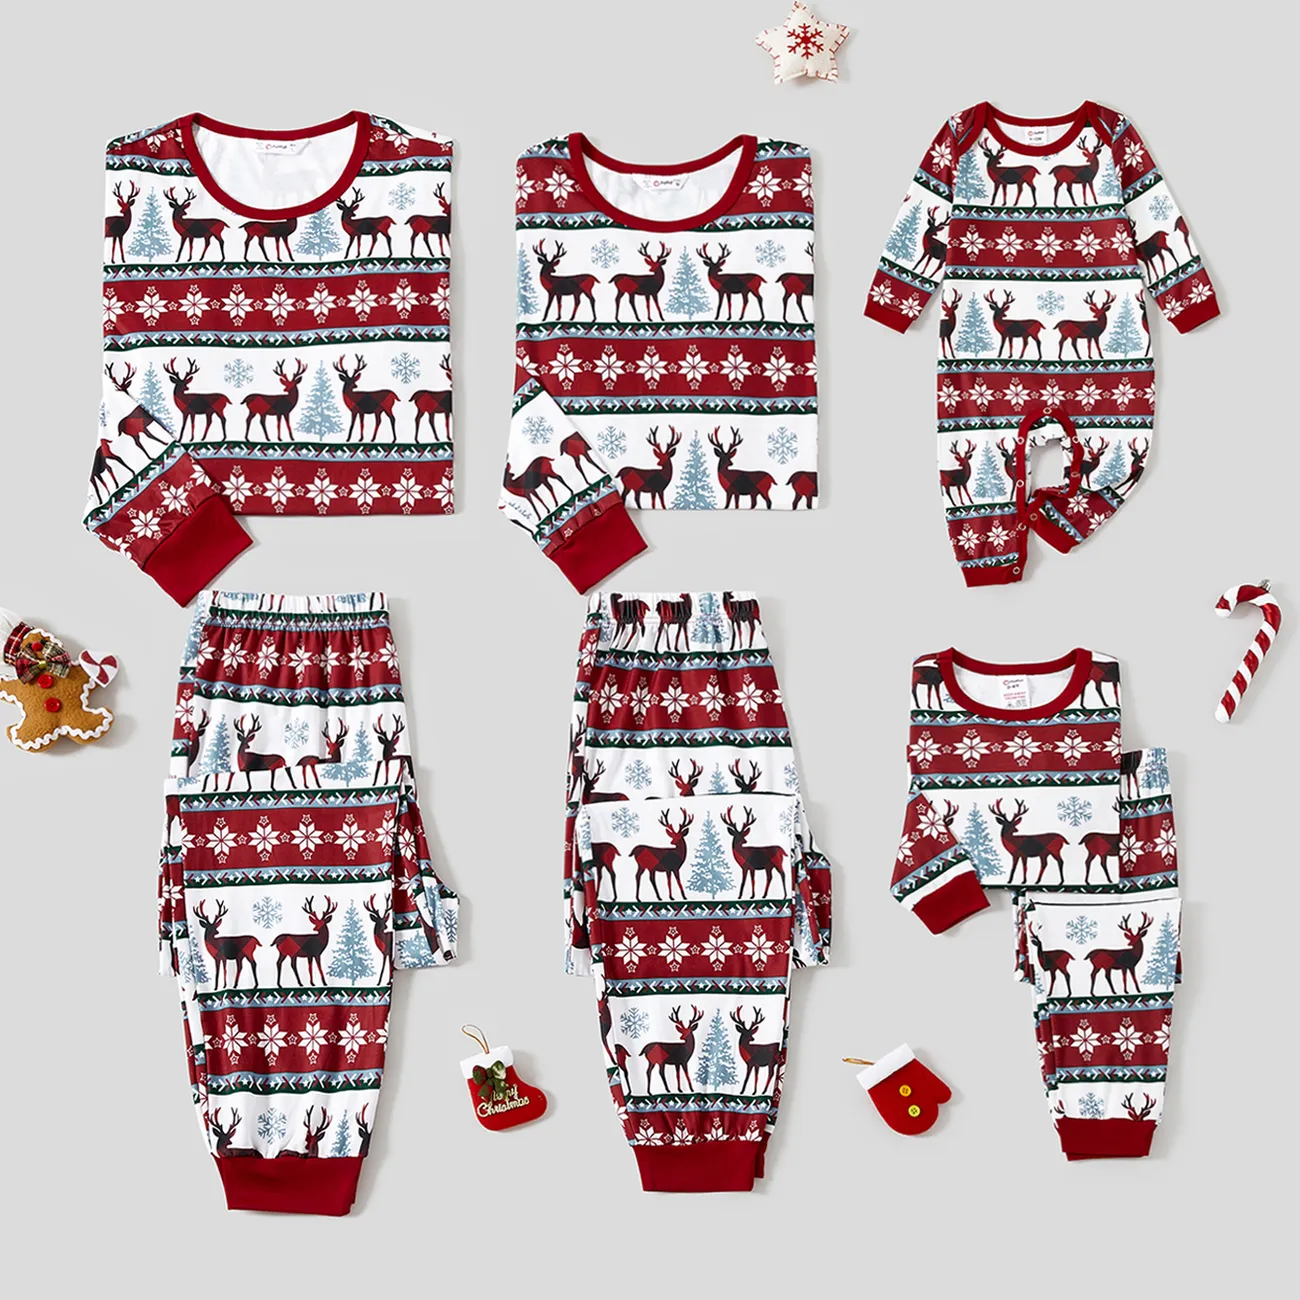 Christmas Reindeer and Snowflake Patterned Family Matching Pajamas Sets(Flame  Resistant) Only $12.99 PatPat US Mobile